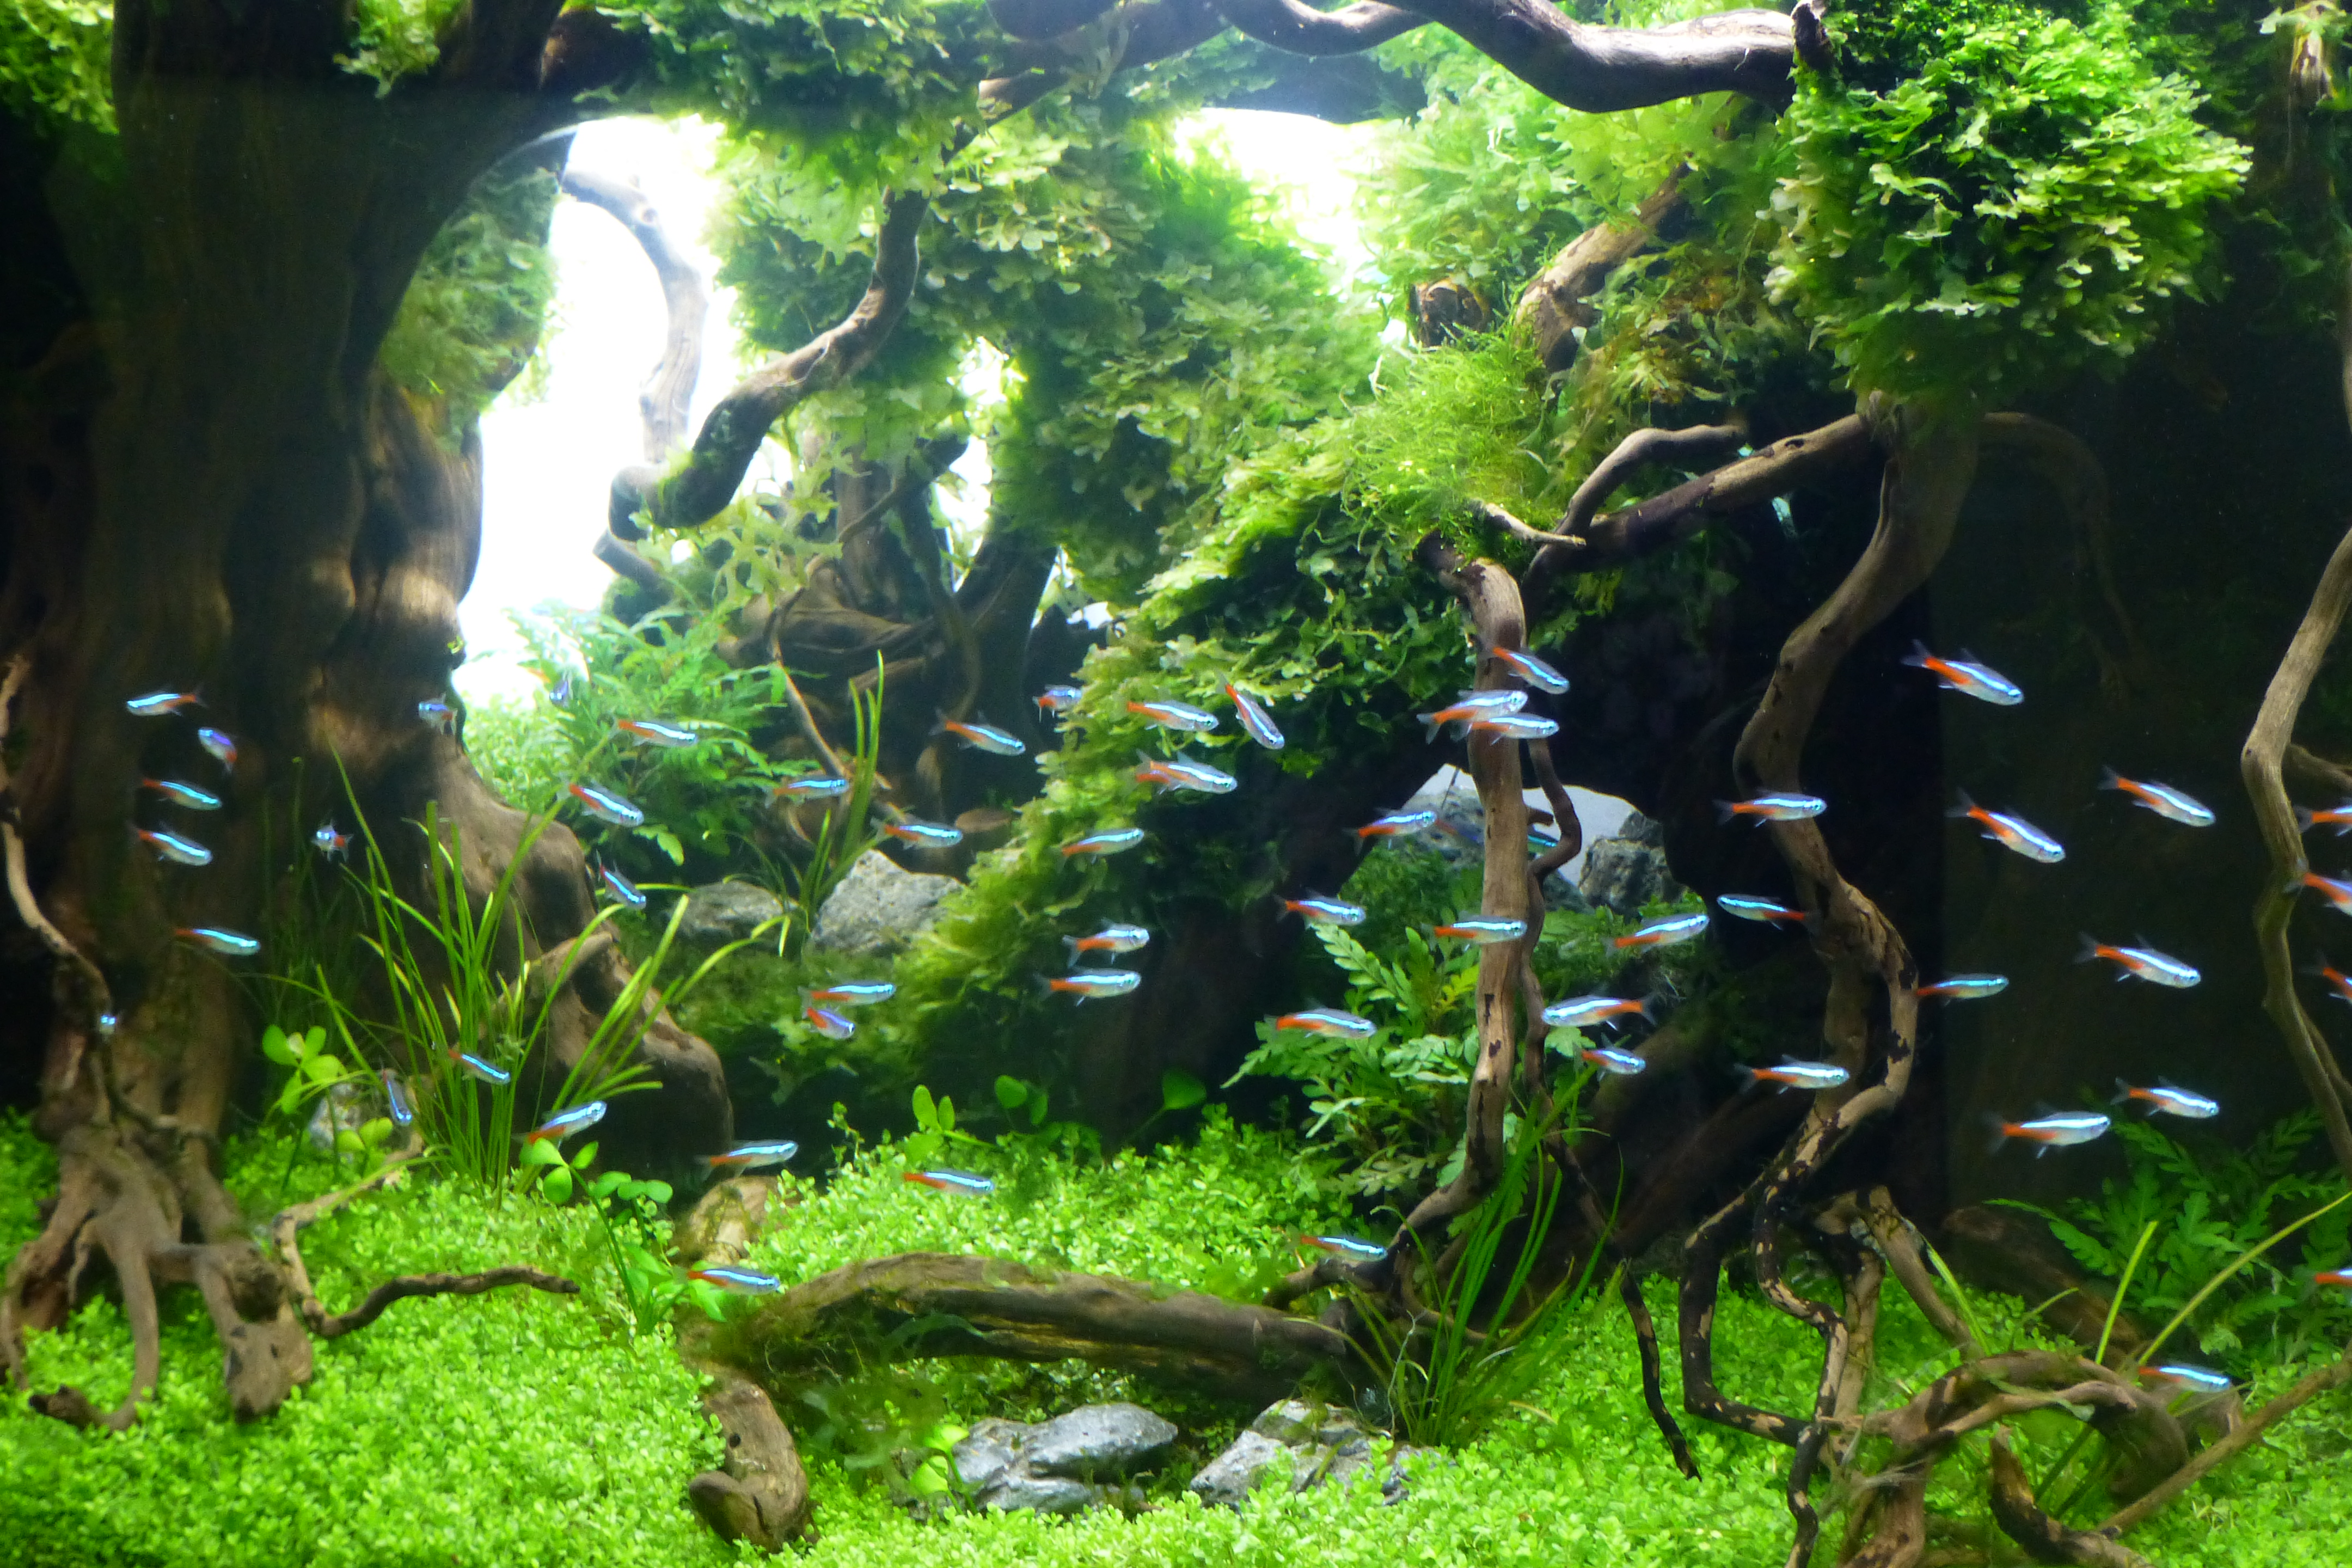 The future of the ornamental fish industry